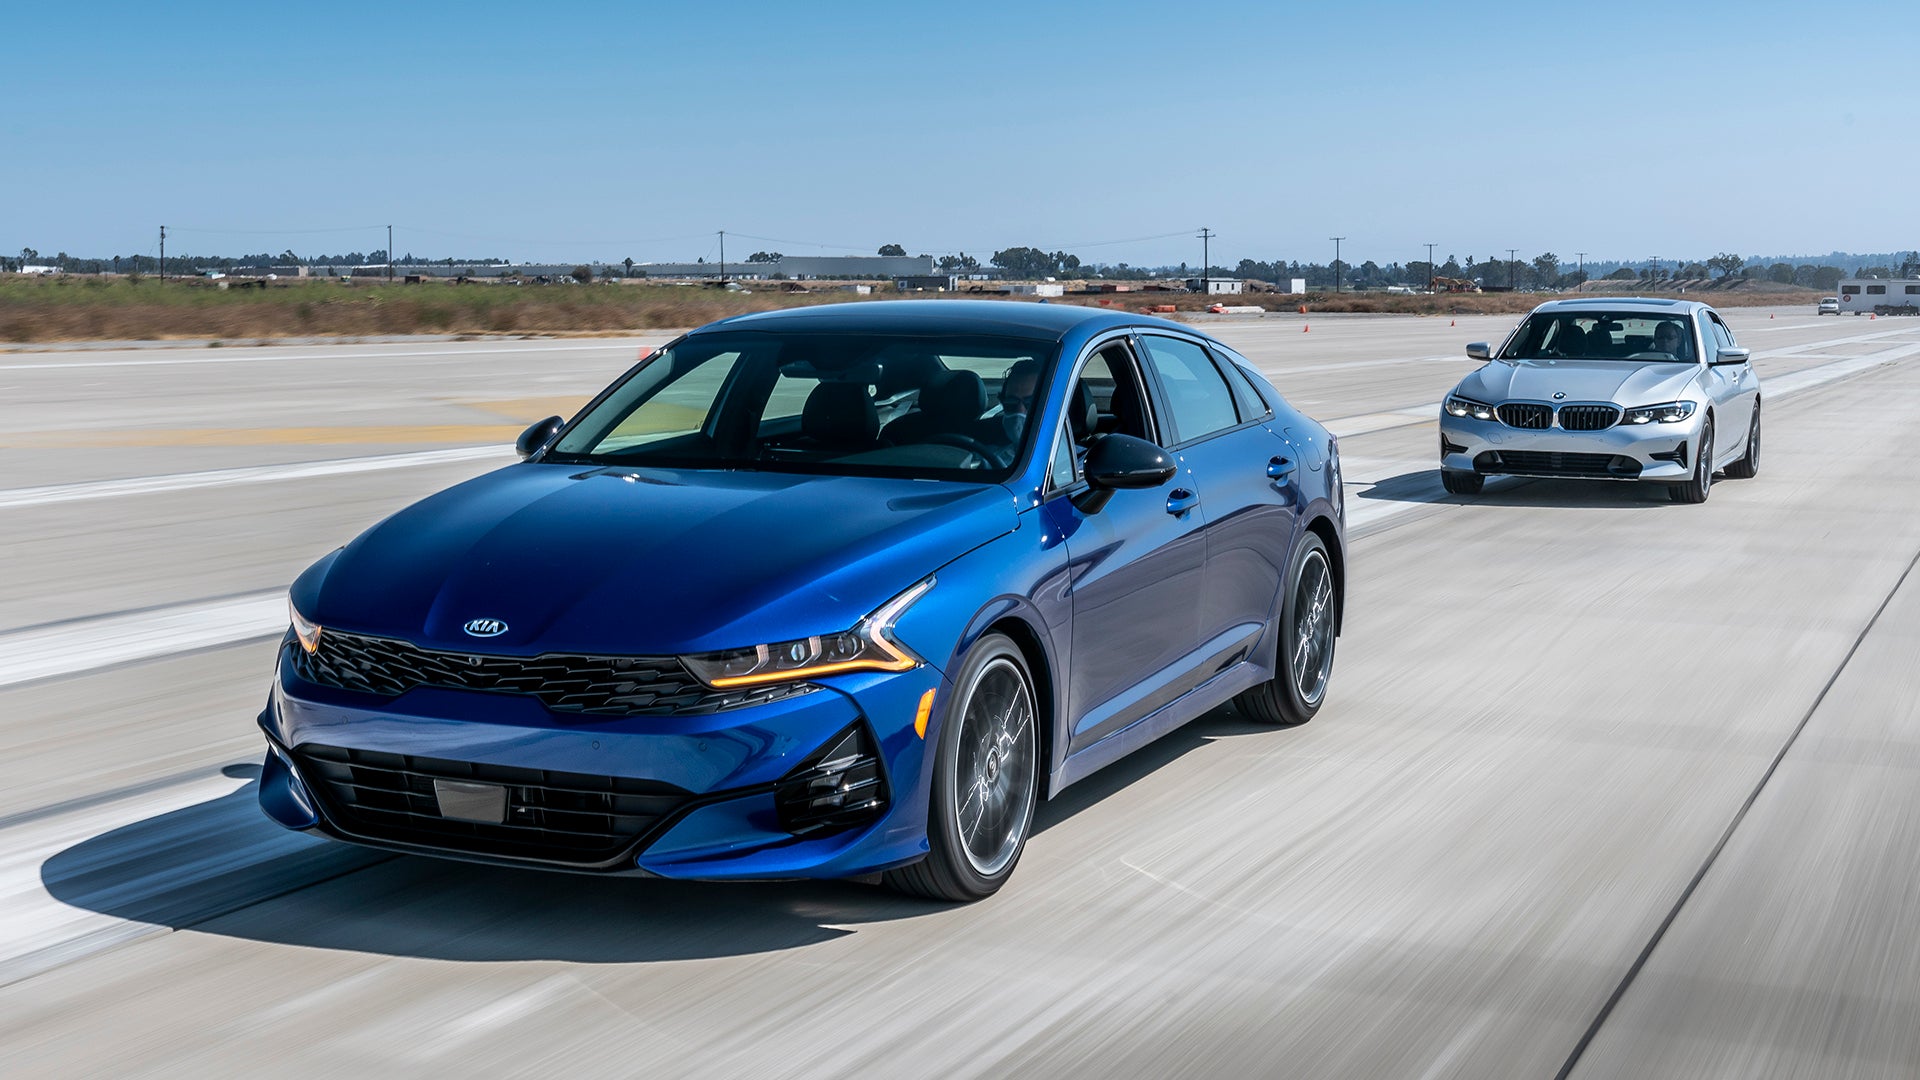 The 2021 Kia K5 GT Out-Performs the BMW 330i. Here’s How the Data Proves It